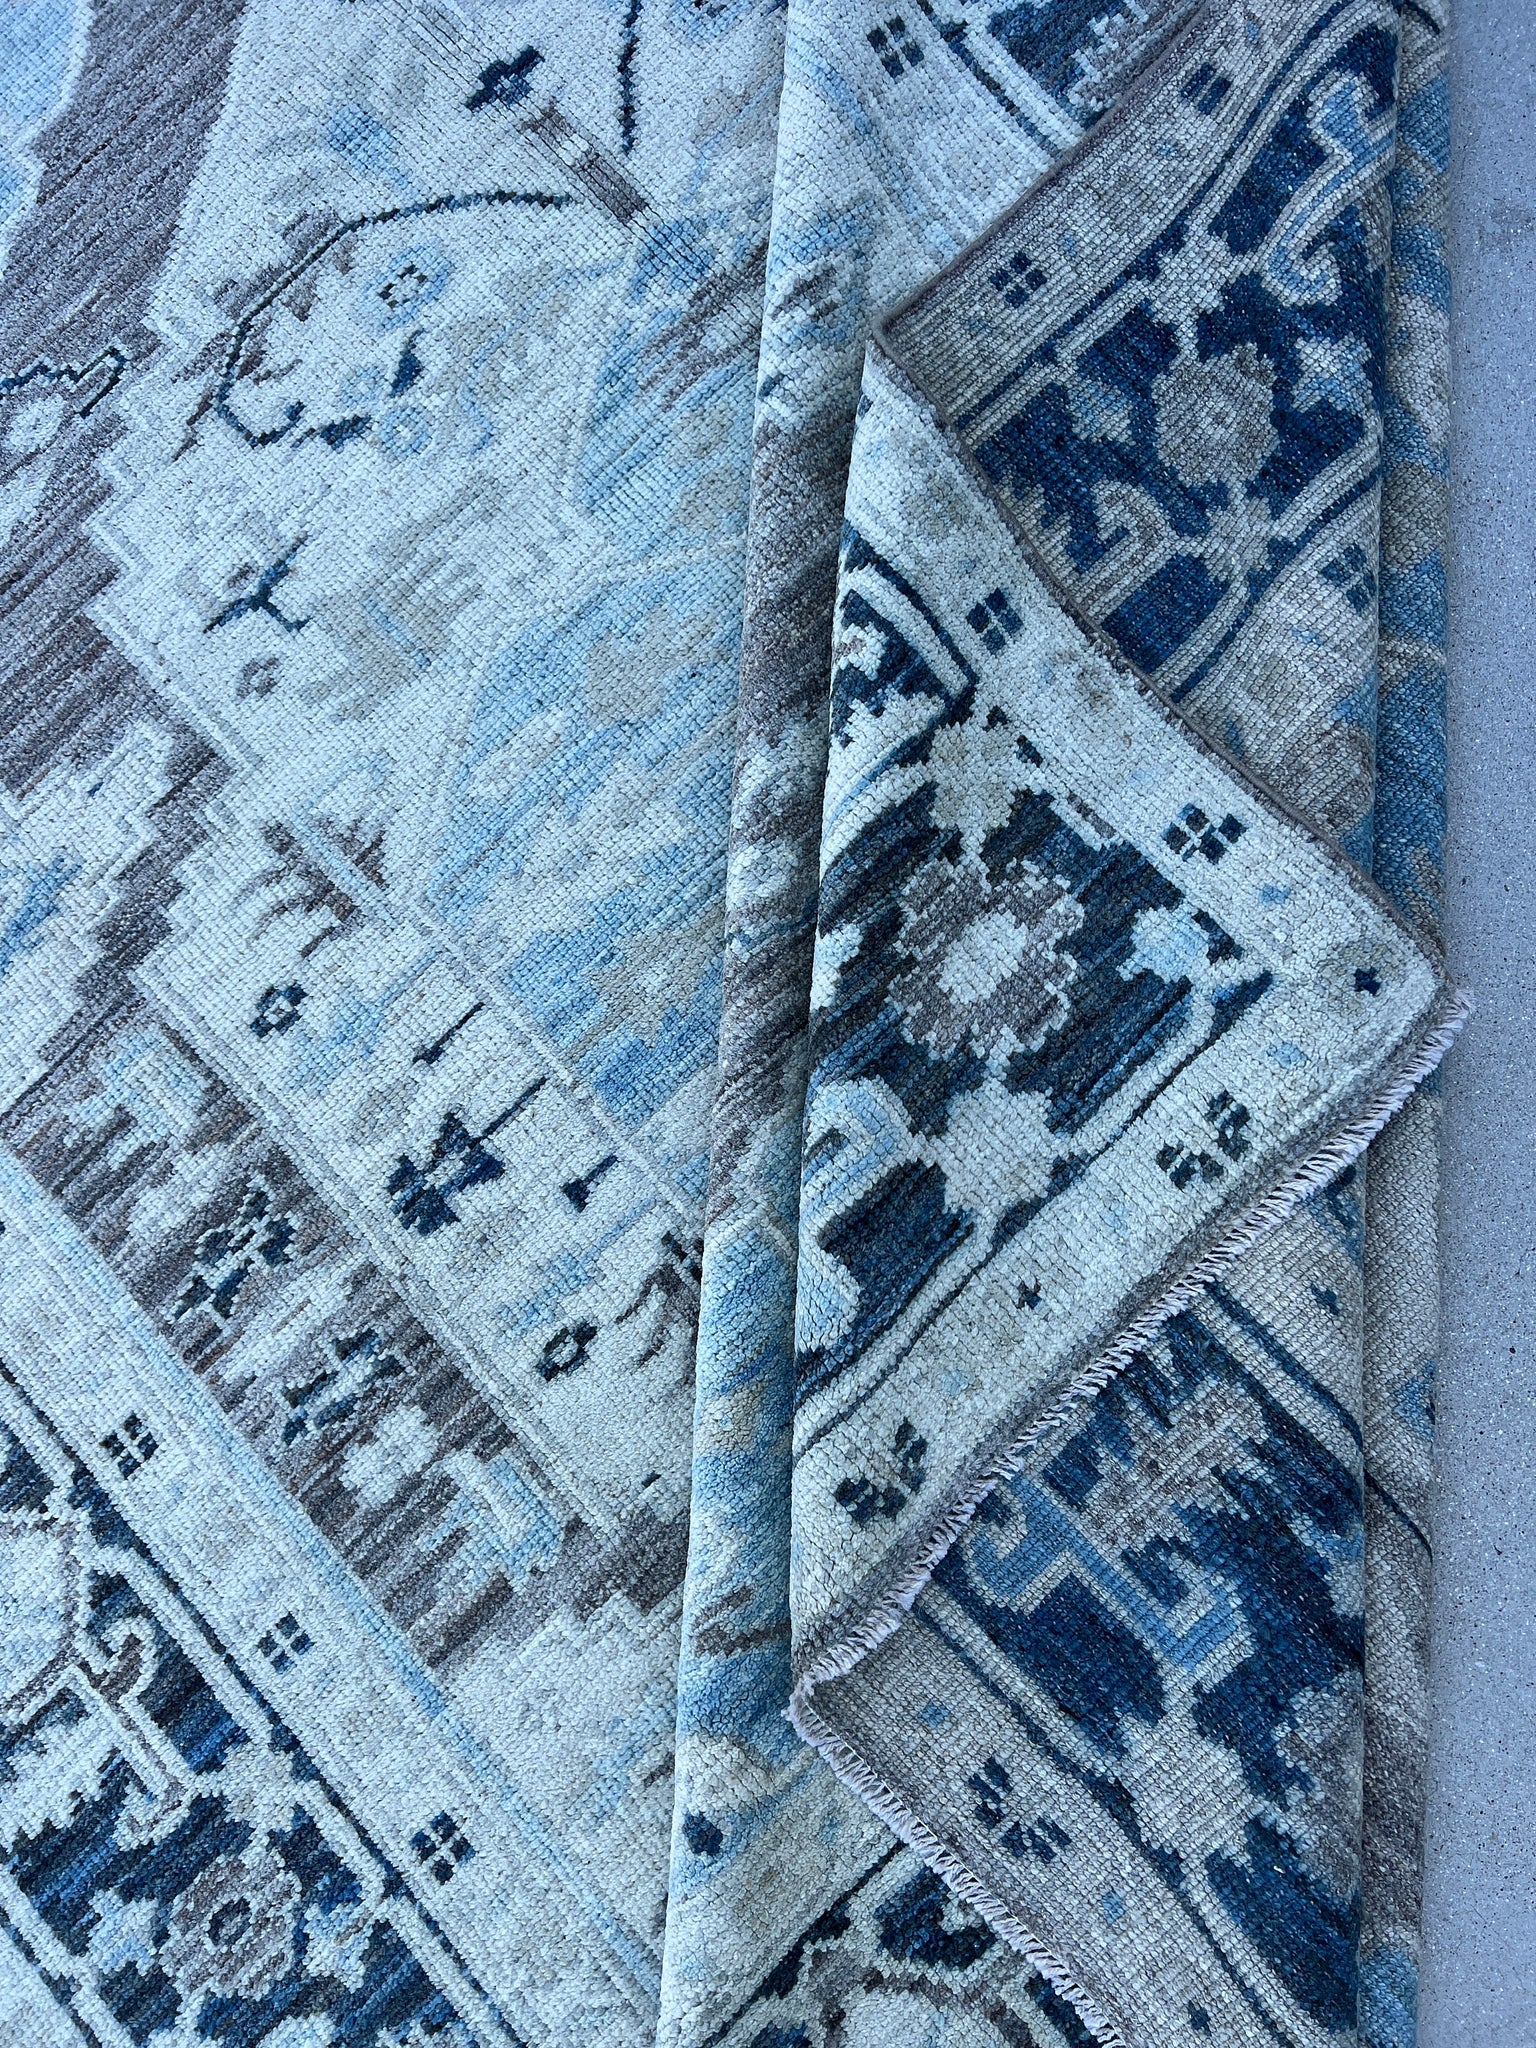 8x10 (240x300) Handmade Afghan Rug | Sky Baby Navy Midnight Blue Grey Ivory Turquoise | Floral Geometric Persian Turkish Hand Knotted Wool